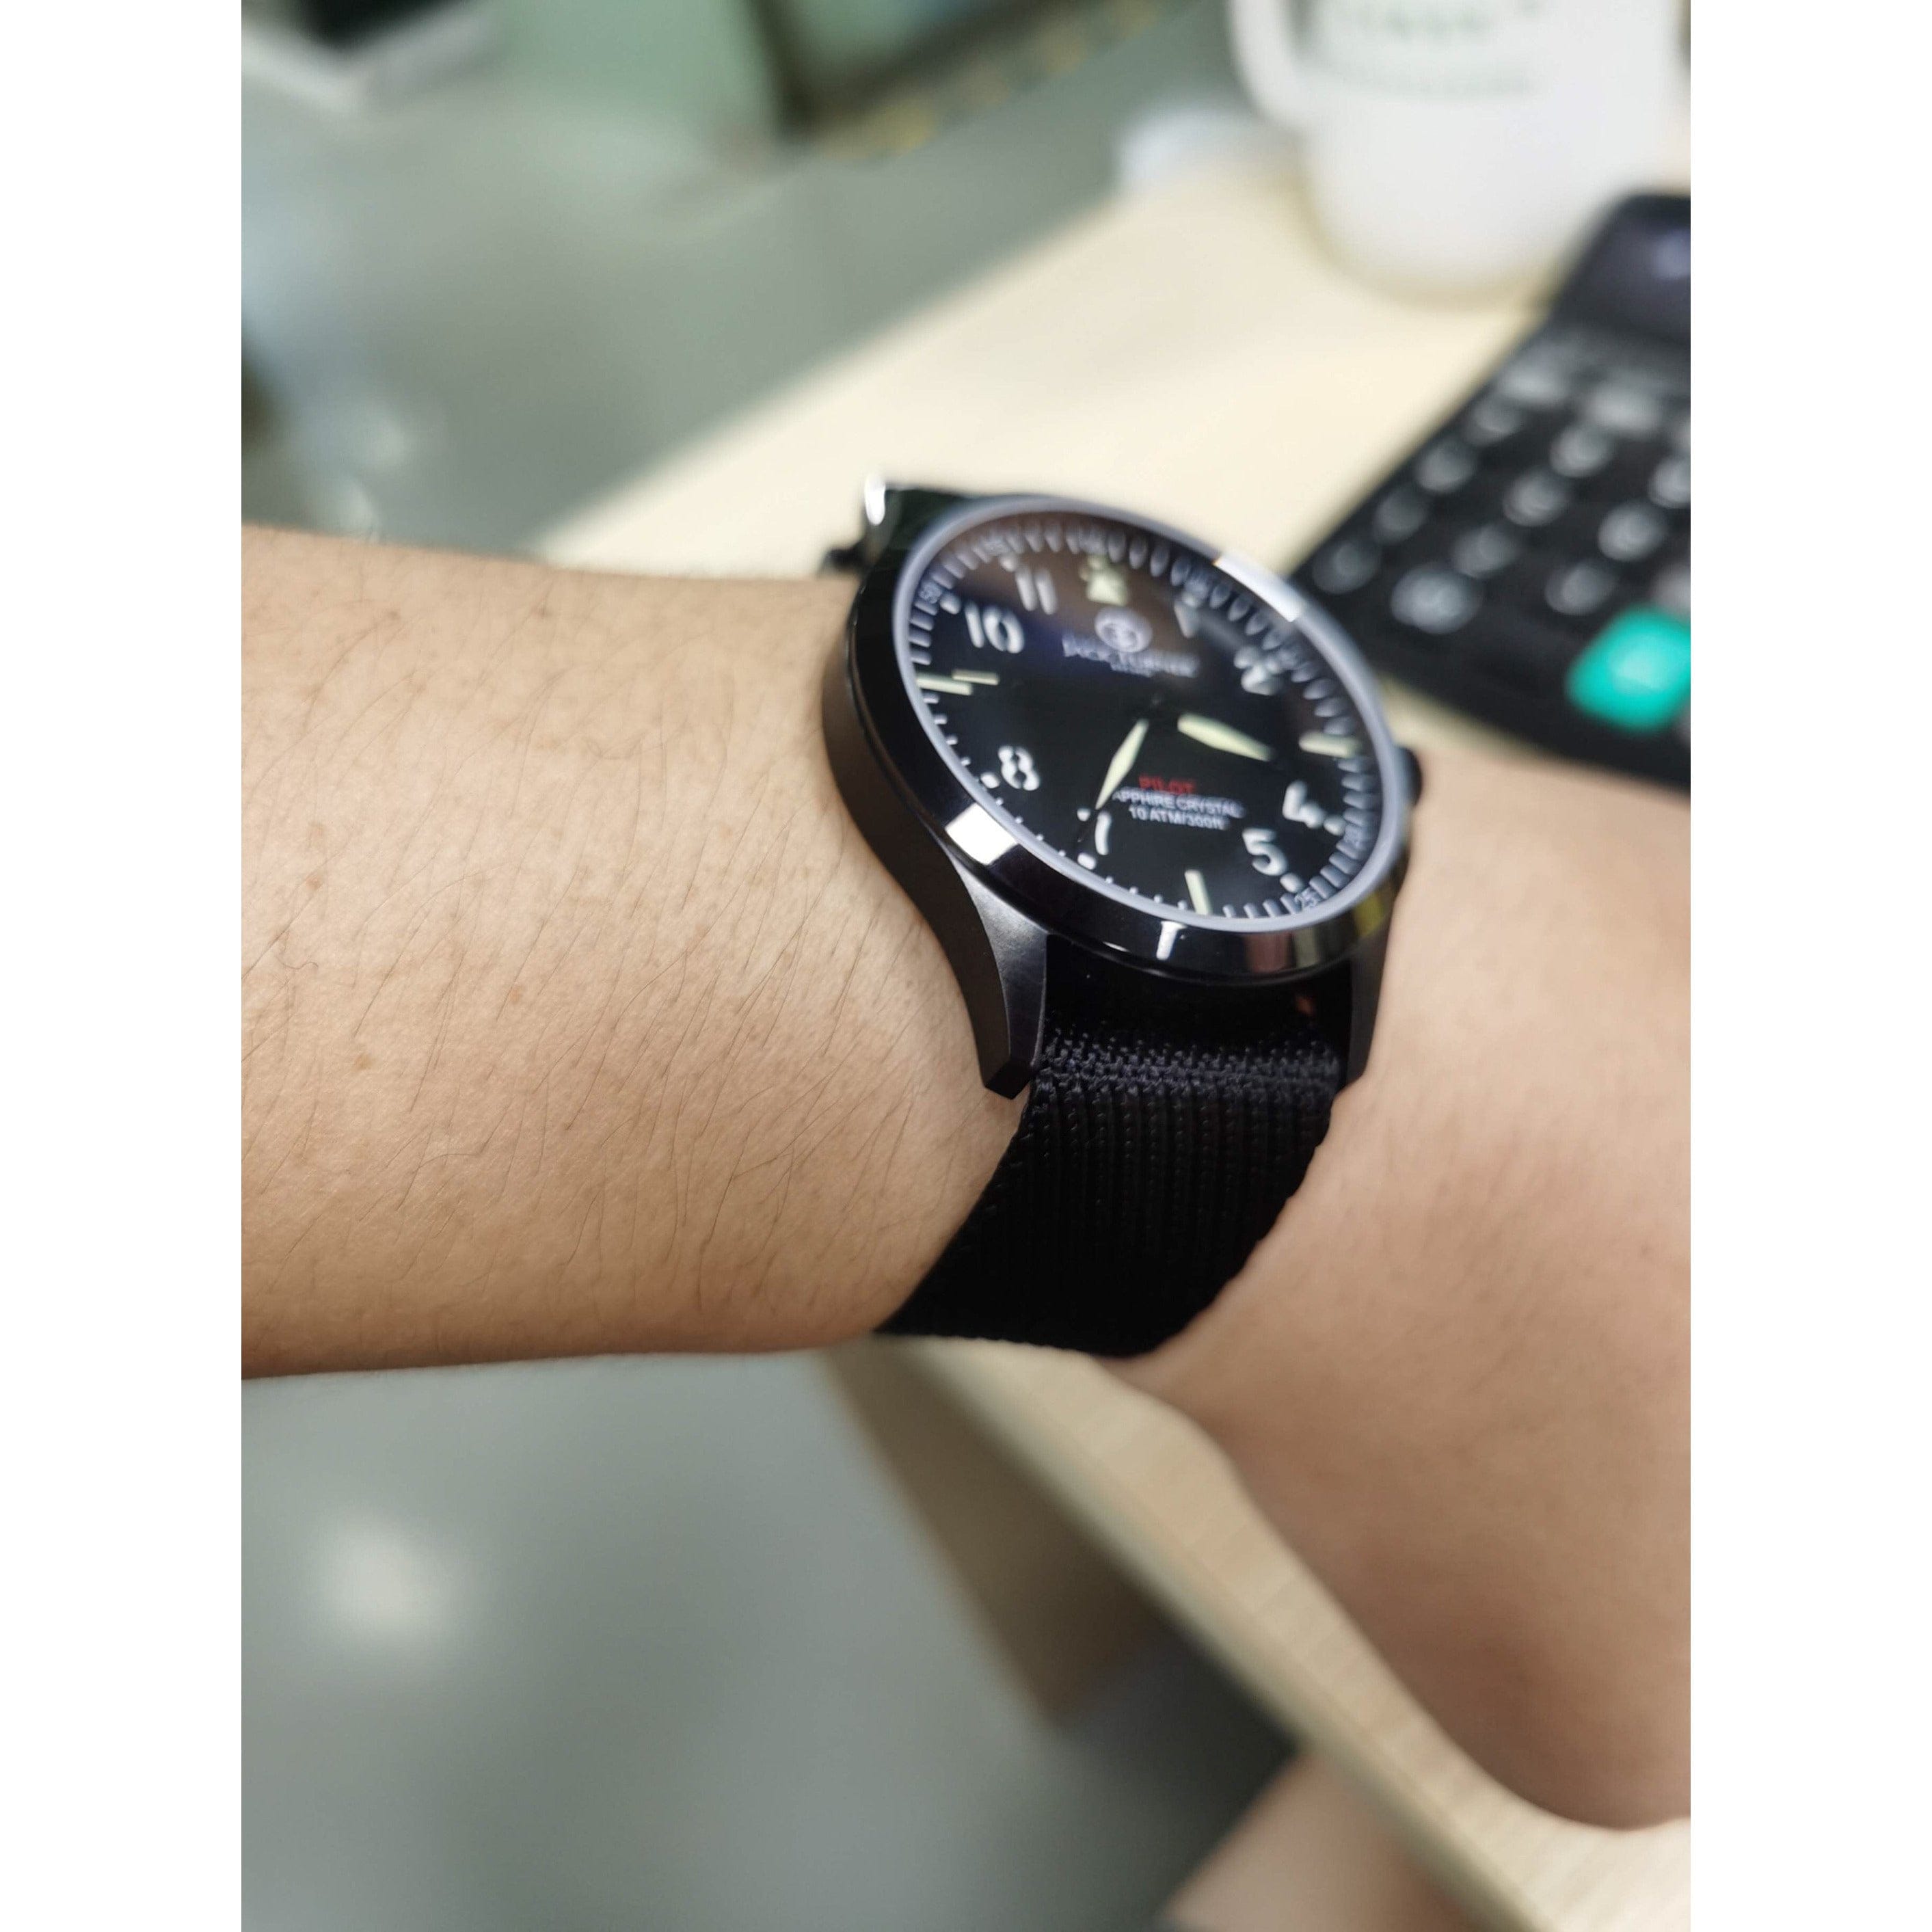 military-inspired watch